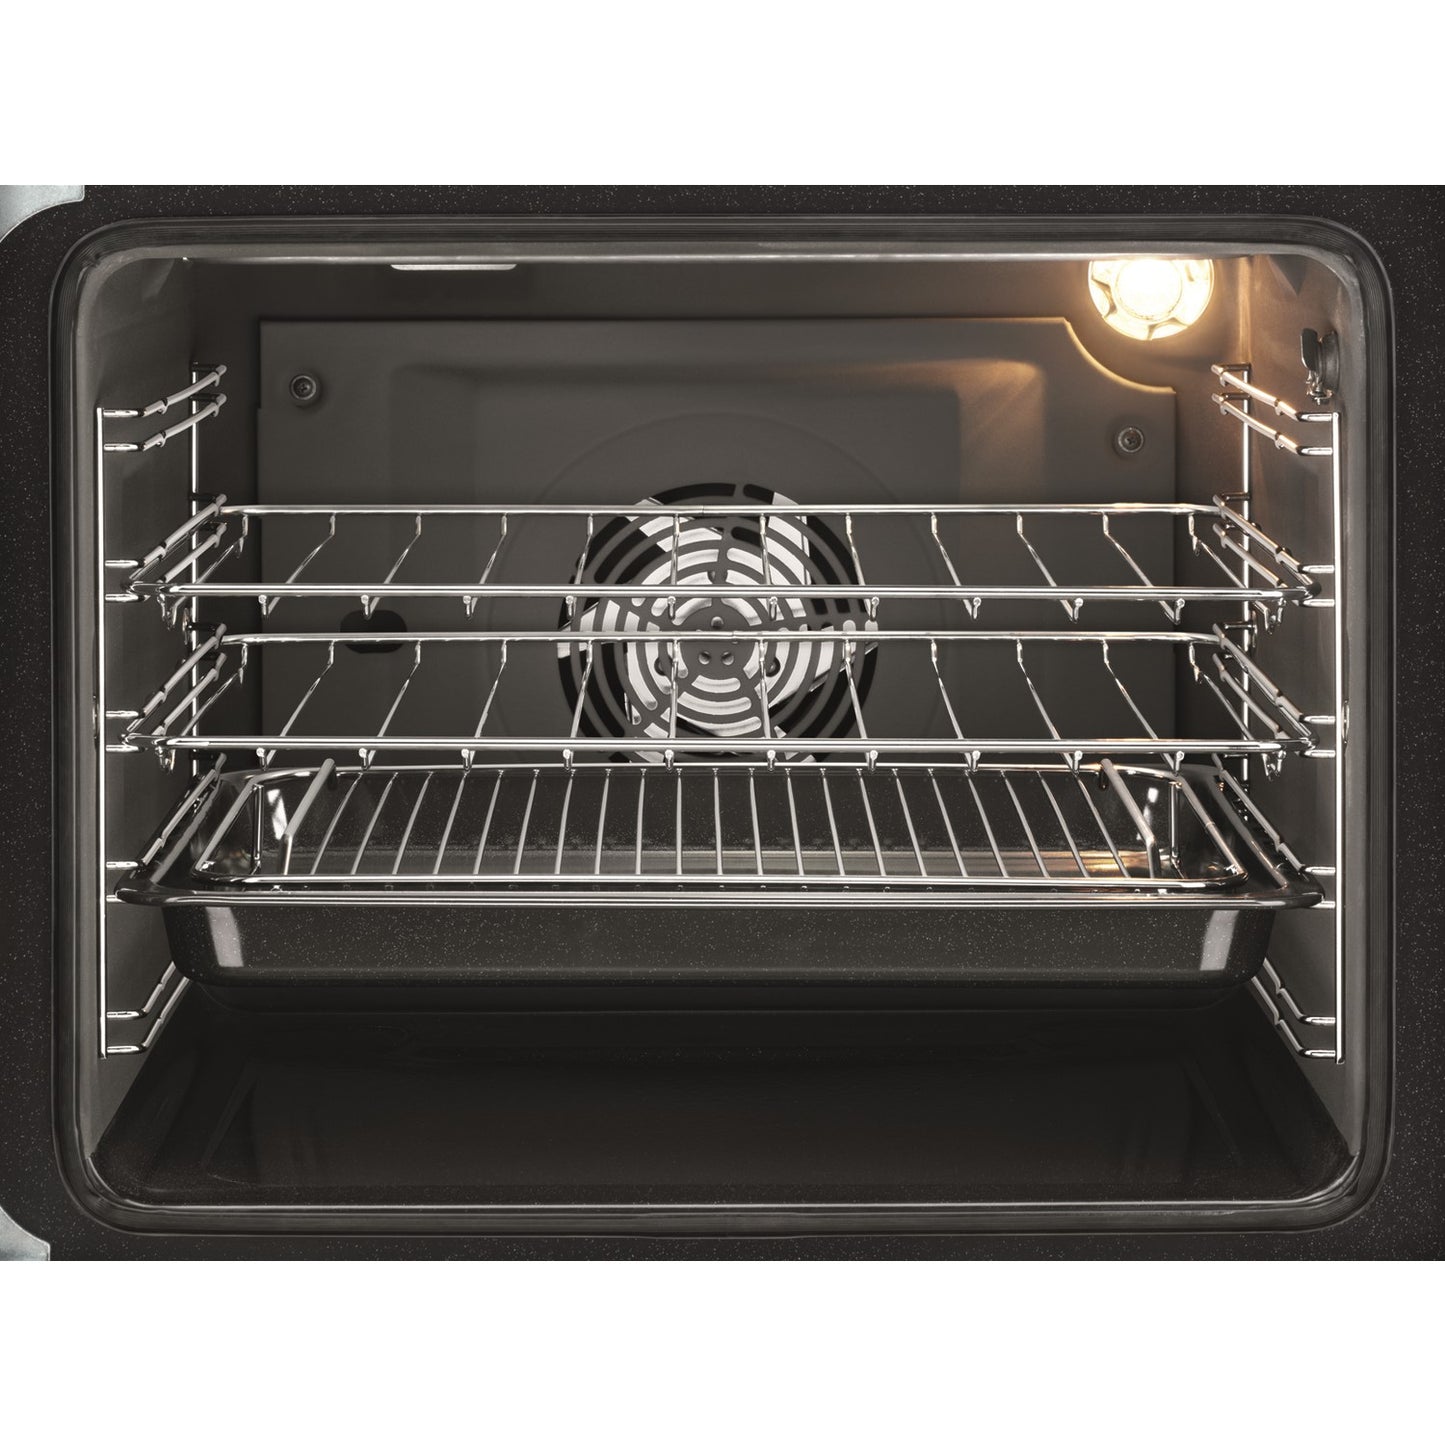 Zanussi 60Cm Induction Electric Cooker With Double Oven Black/Stainless Steel - ZCI66250XA